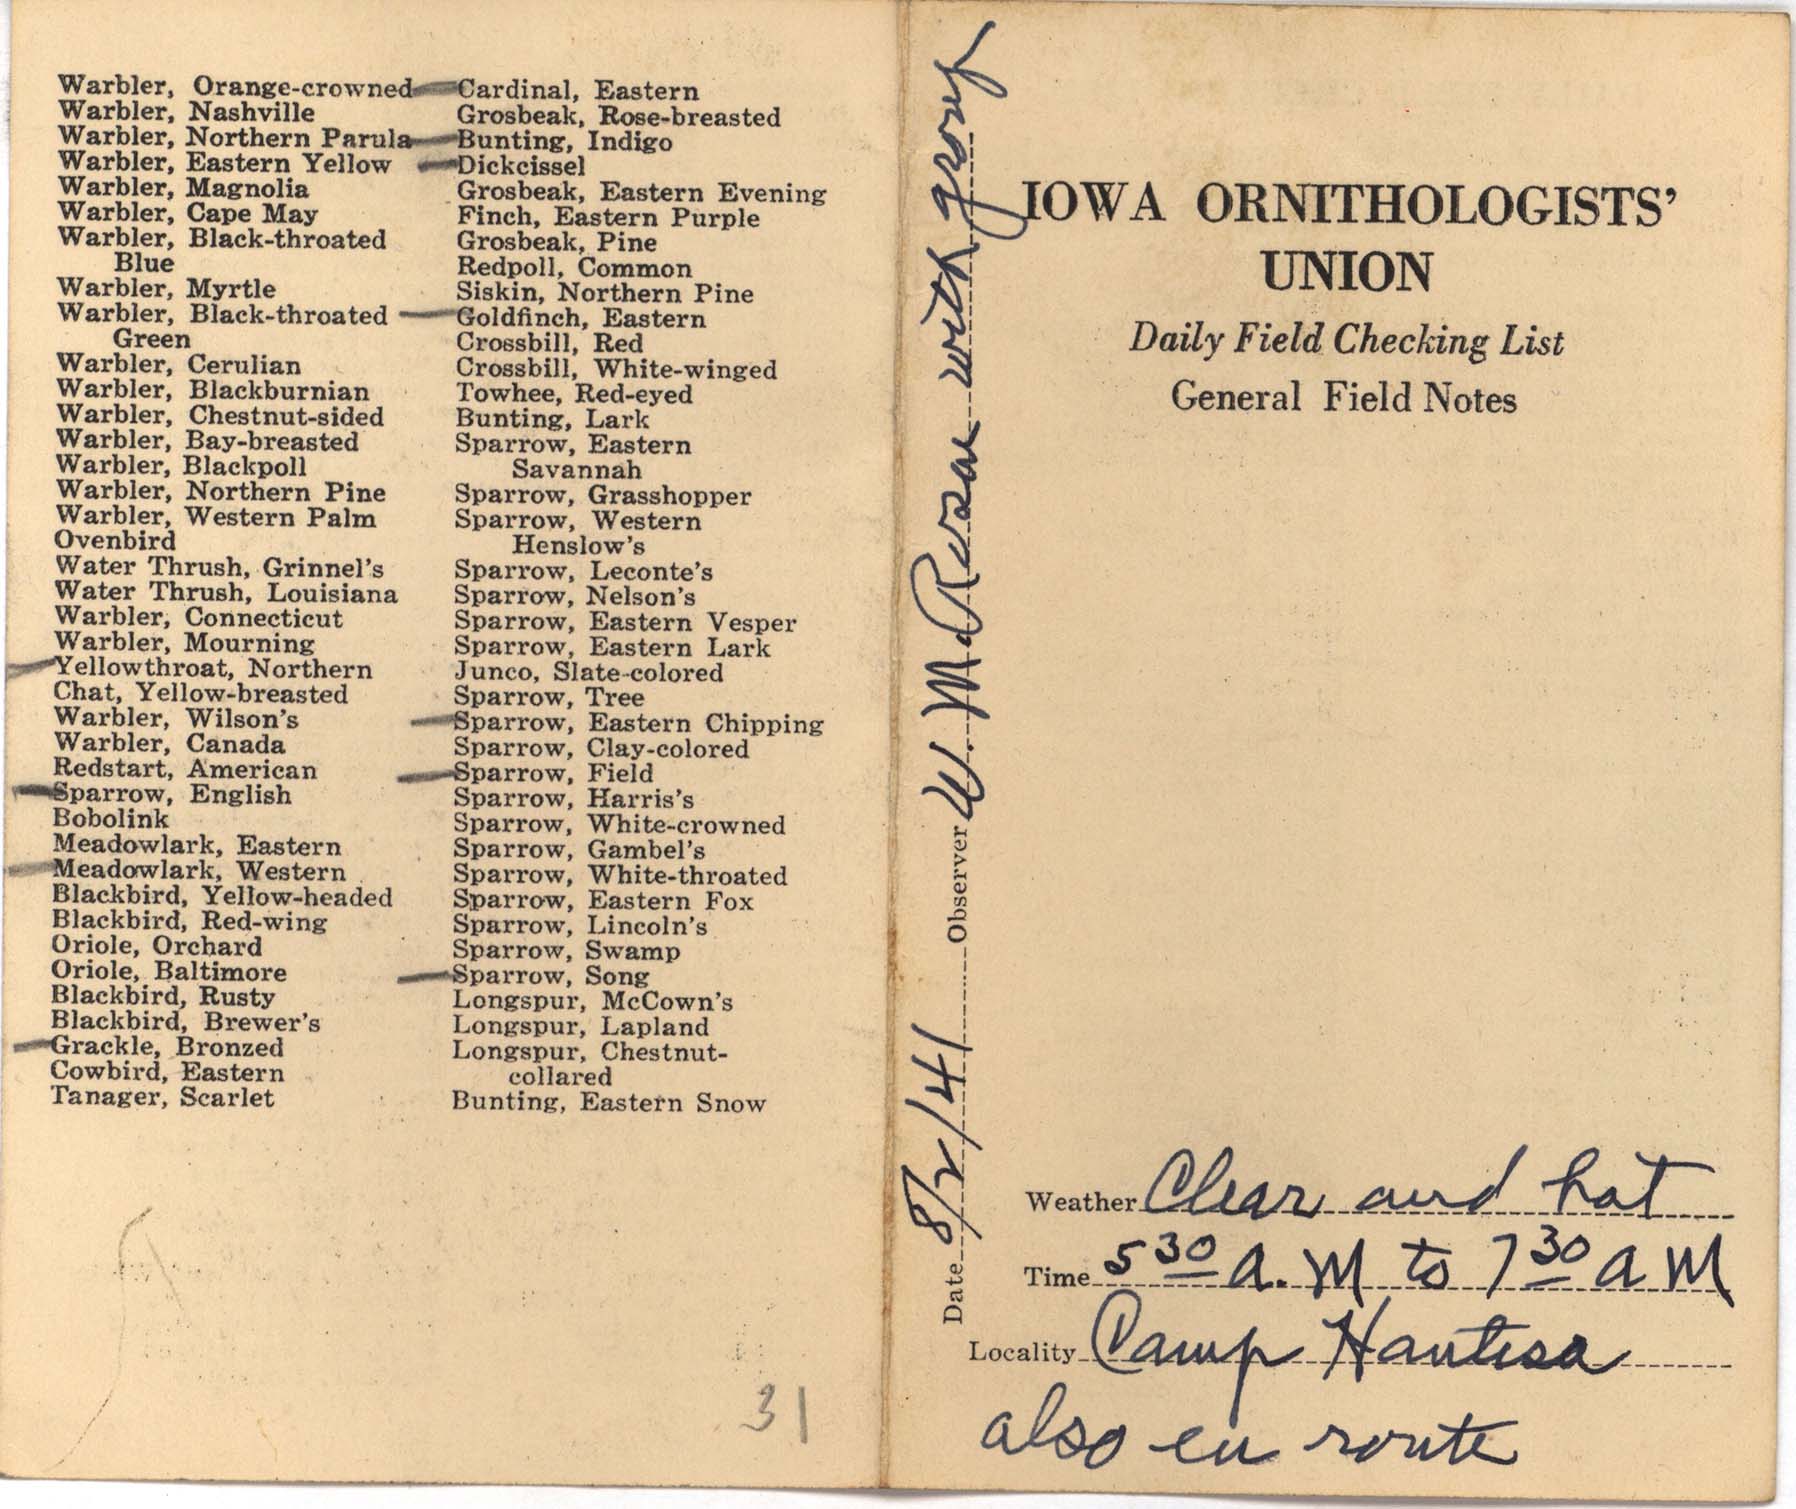 Daily field checking list by Walter Rosene, August 2, 1941